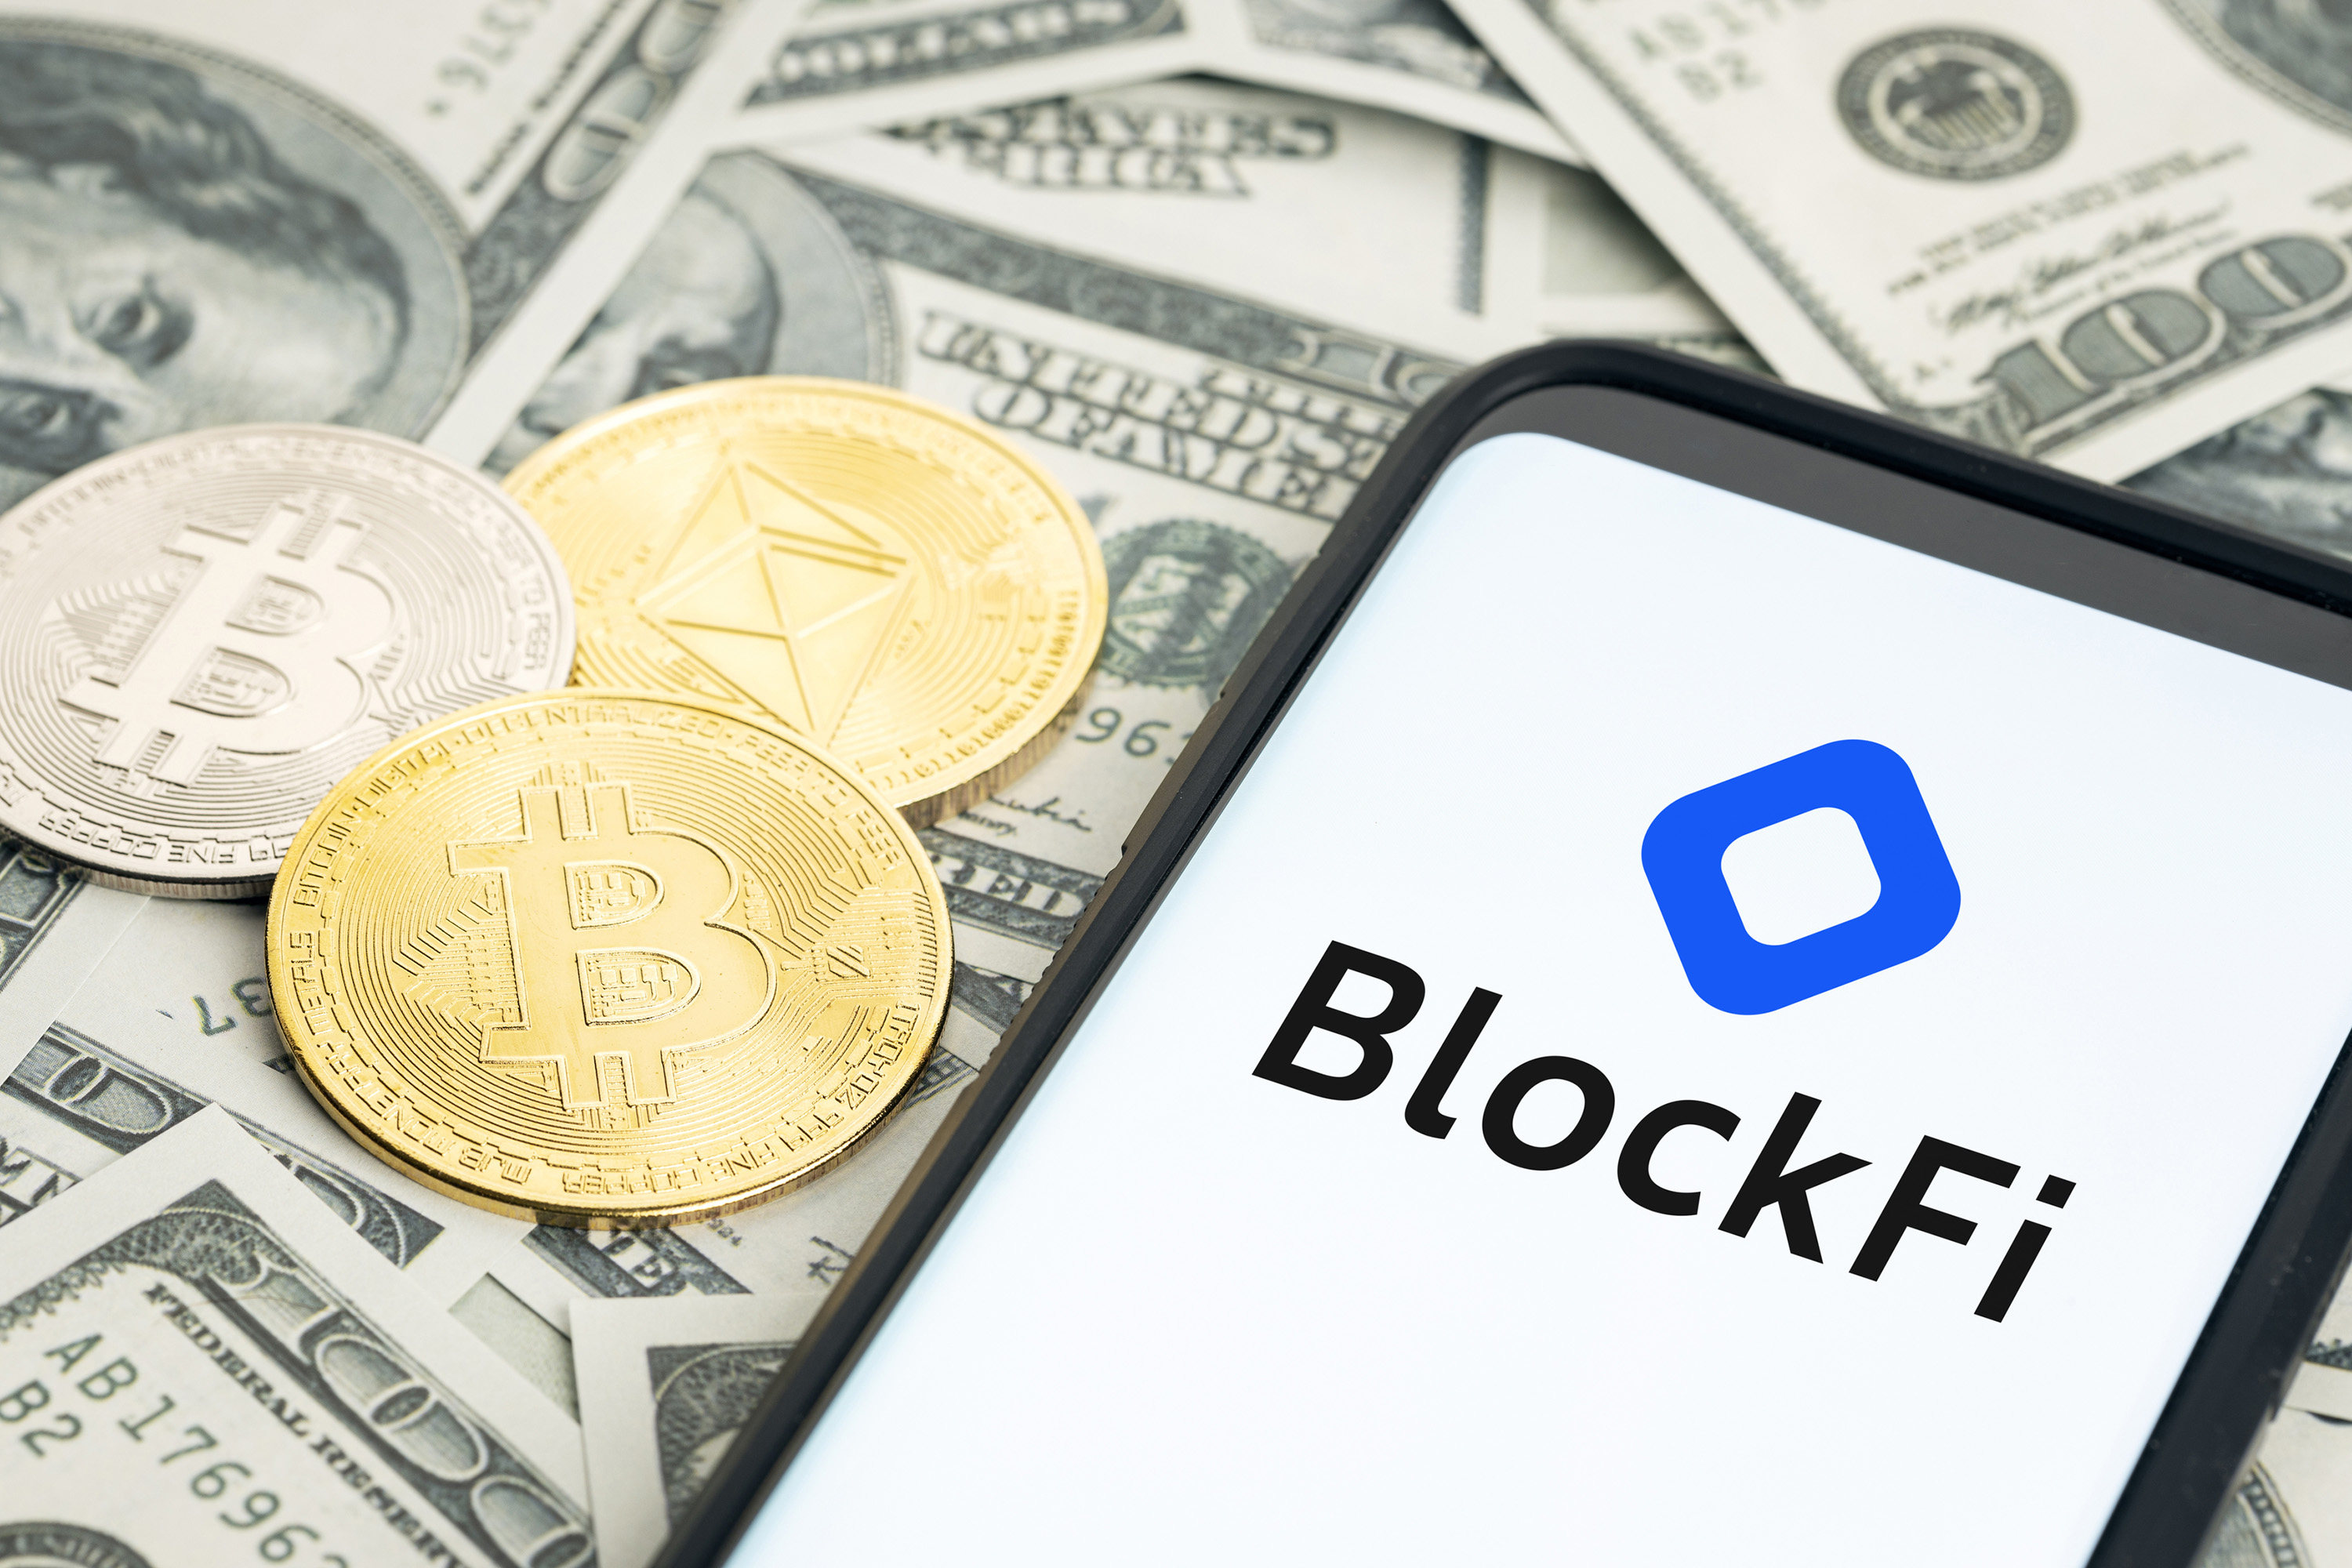 BlockFi Inc has filed for bankruptcy, saying exposure to FTX led to a liquidity crisis. Photo: TNS